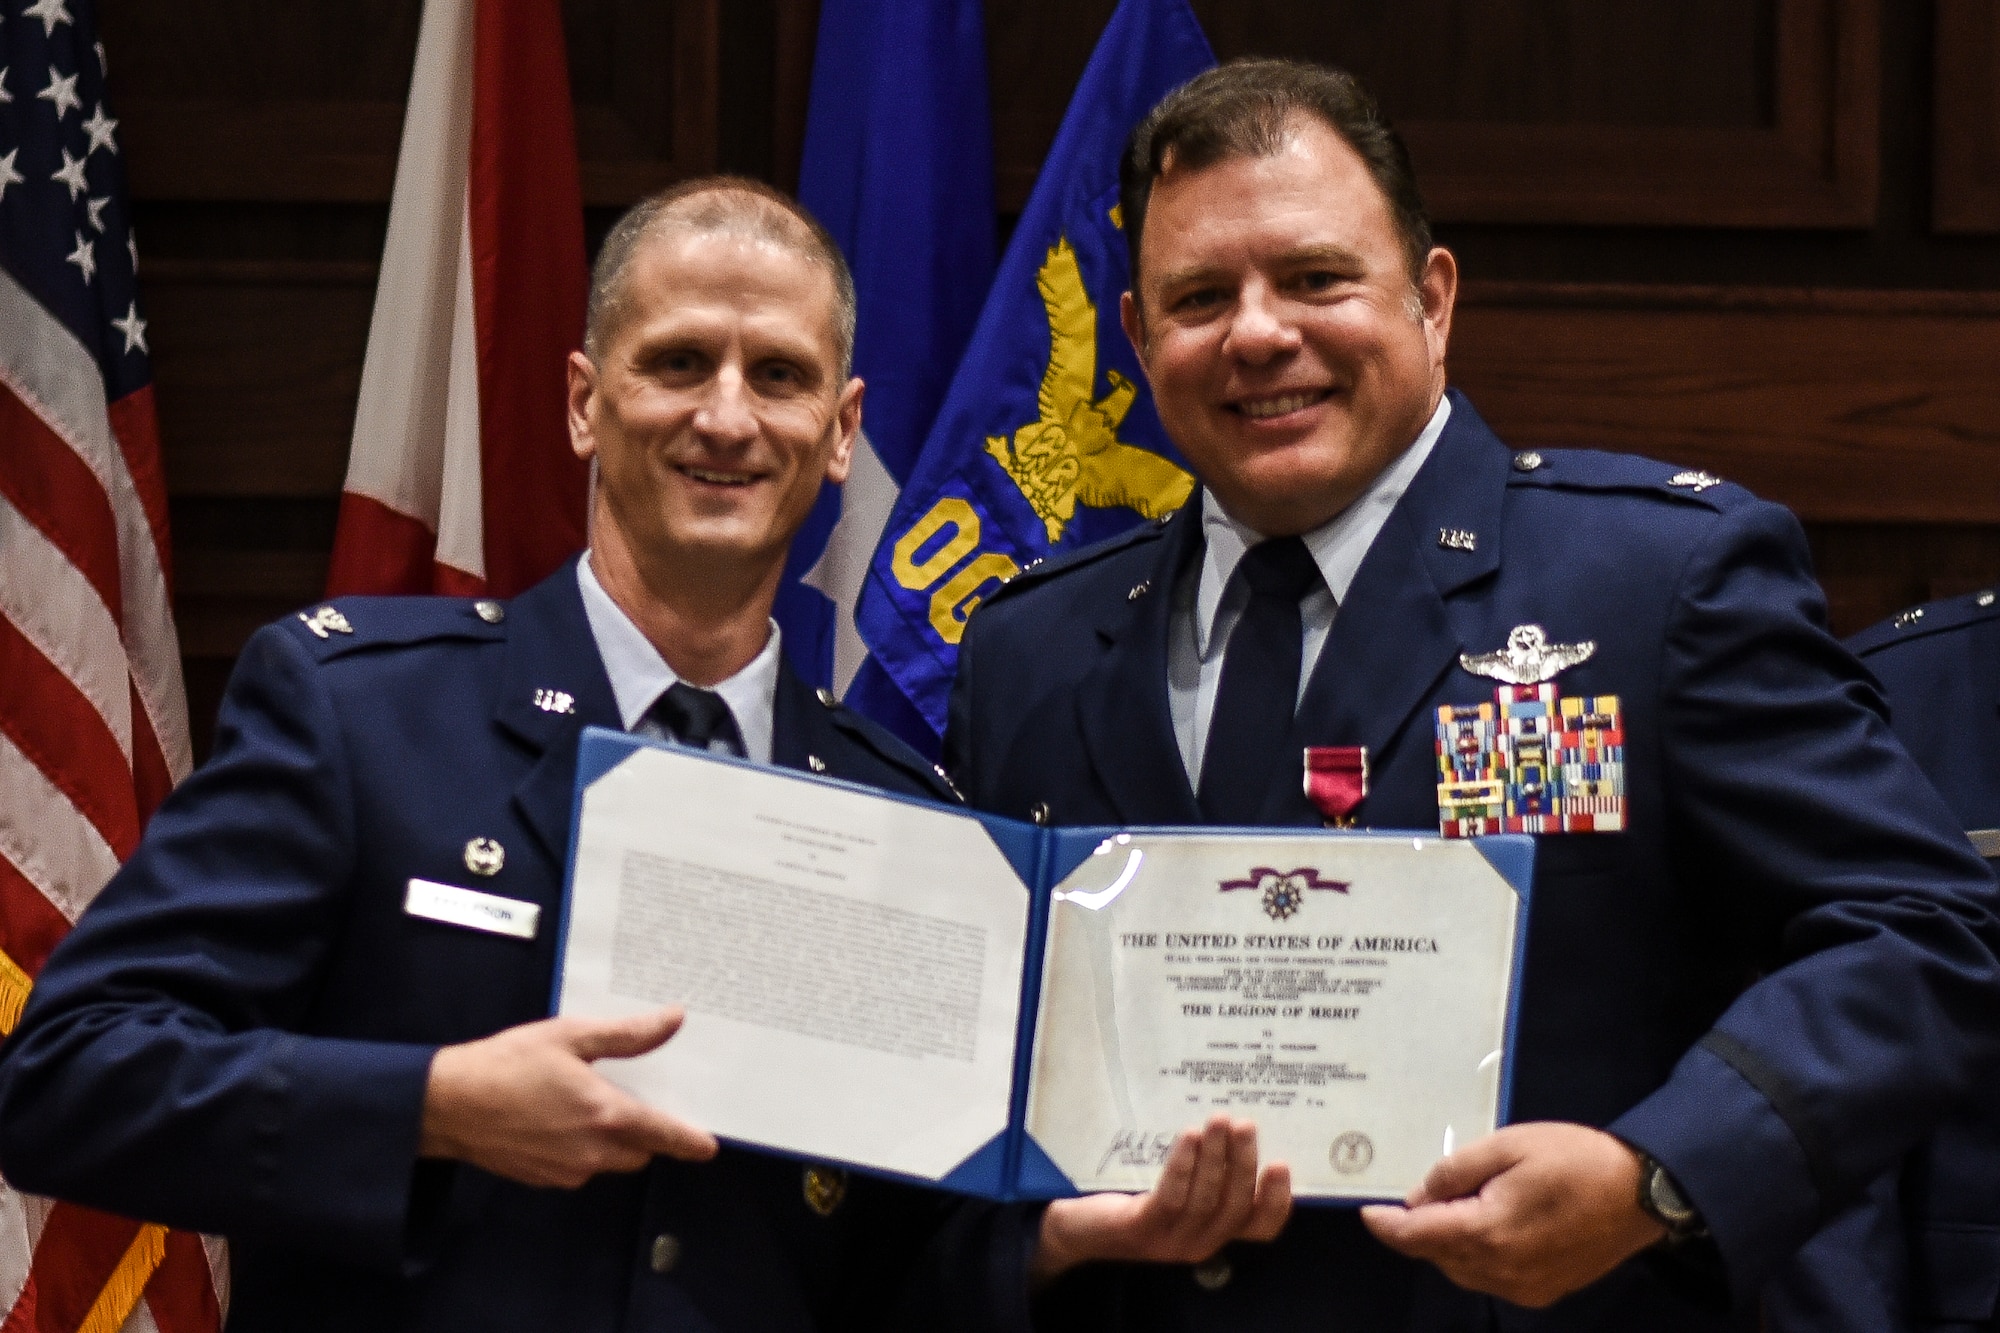 Col. Randal K. Efferson, 187th Fighter Wing commander, and Col. Clarence “Ski” Borowski, 187th Operations Group commander, pose after Borowski received the Legion of Merit Aug. 7, 2016, at the OG Change of Command ceremony at Montgomery Regional Air National Guard Base, Ala. Borowski began his career as an enlisted weapons system specialist before commissioning in 1992. He has flown the U.S. Air Force F-16 Fighting Falcon and RC-26B reconnaissance aircraft, amassing more than 4,000 flight hours. (U.S. Air National Guard photo by Airman 1st Class Hayden Johnson)